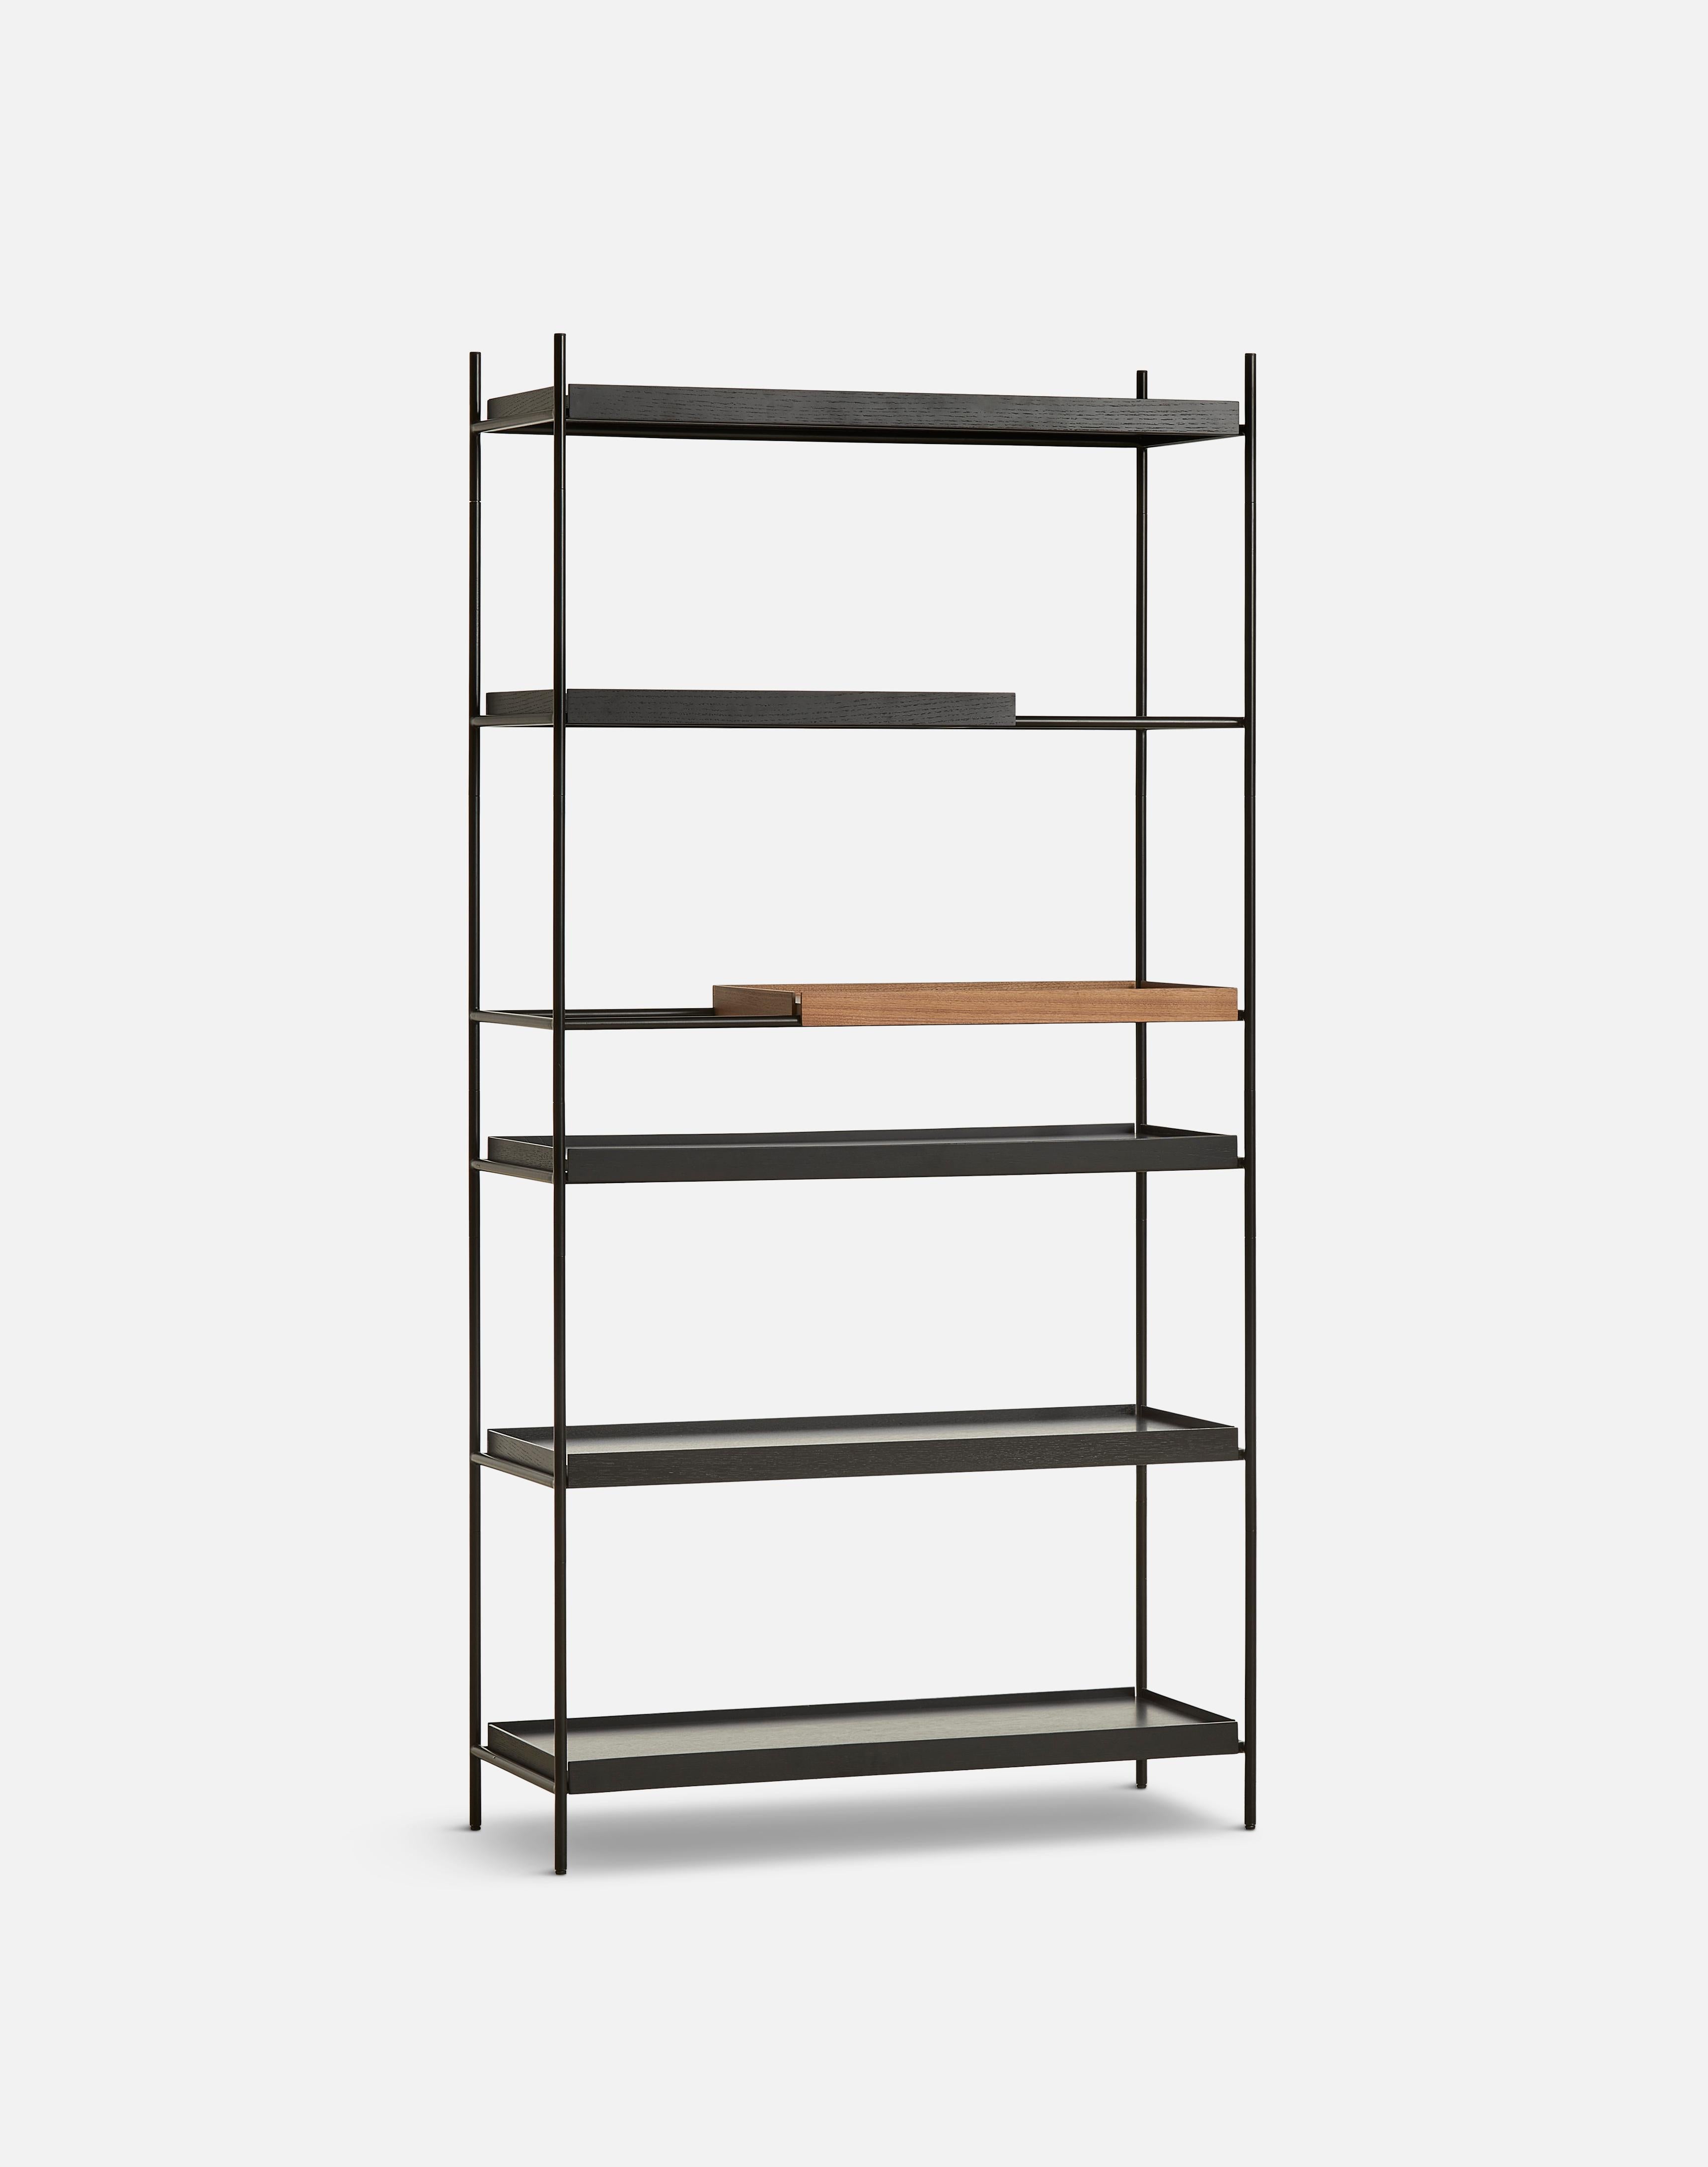 High walnut and black tray shelf IV by Hanne Willmann.
Materials: Metal, walnut.
Dimensions: D 40 x W 100 x H 201 cm.
Also available in different tray conbinations and 2 sizes: H81, H 201 cm.

Hanne Willmann is a dynamic German designer with